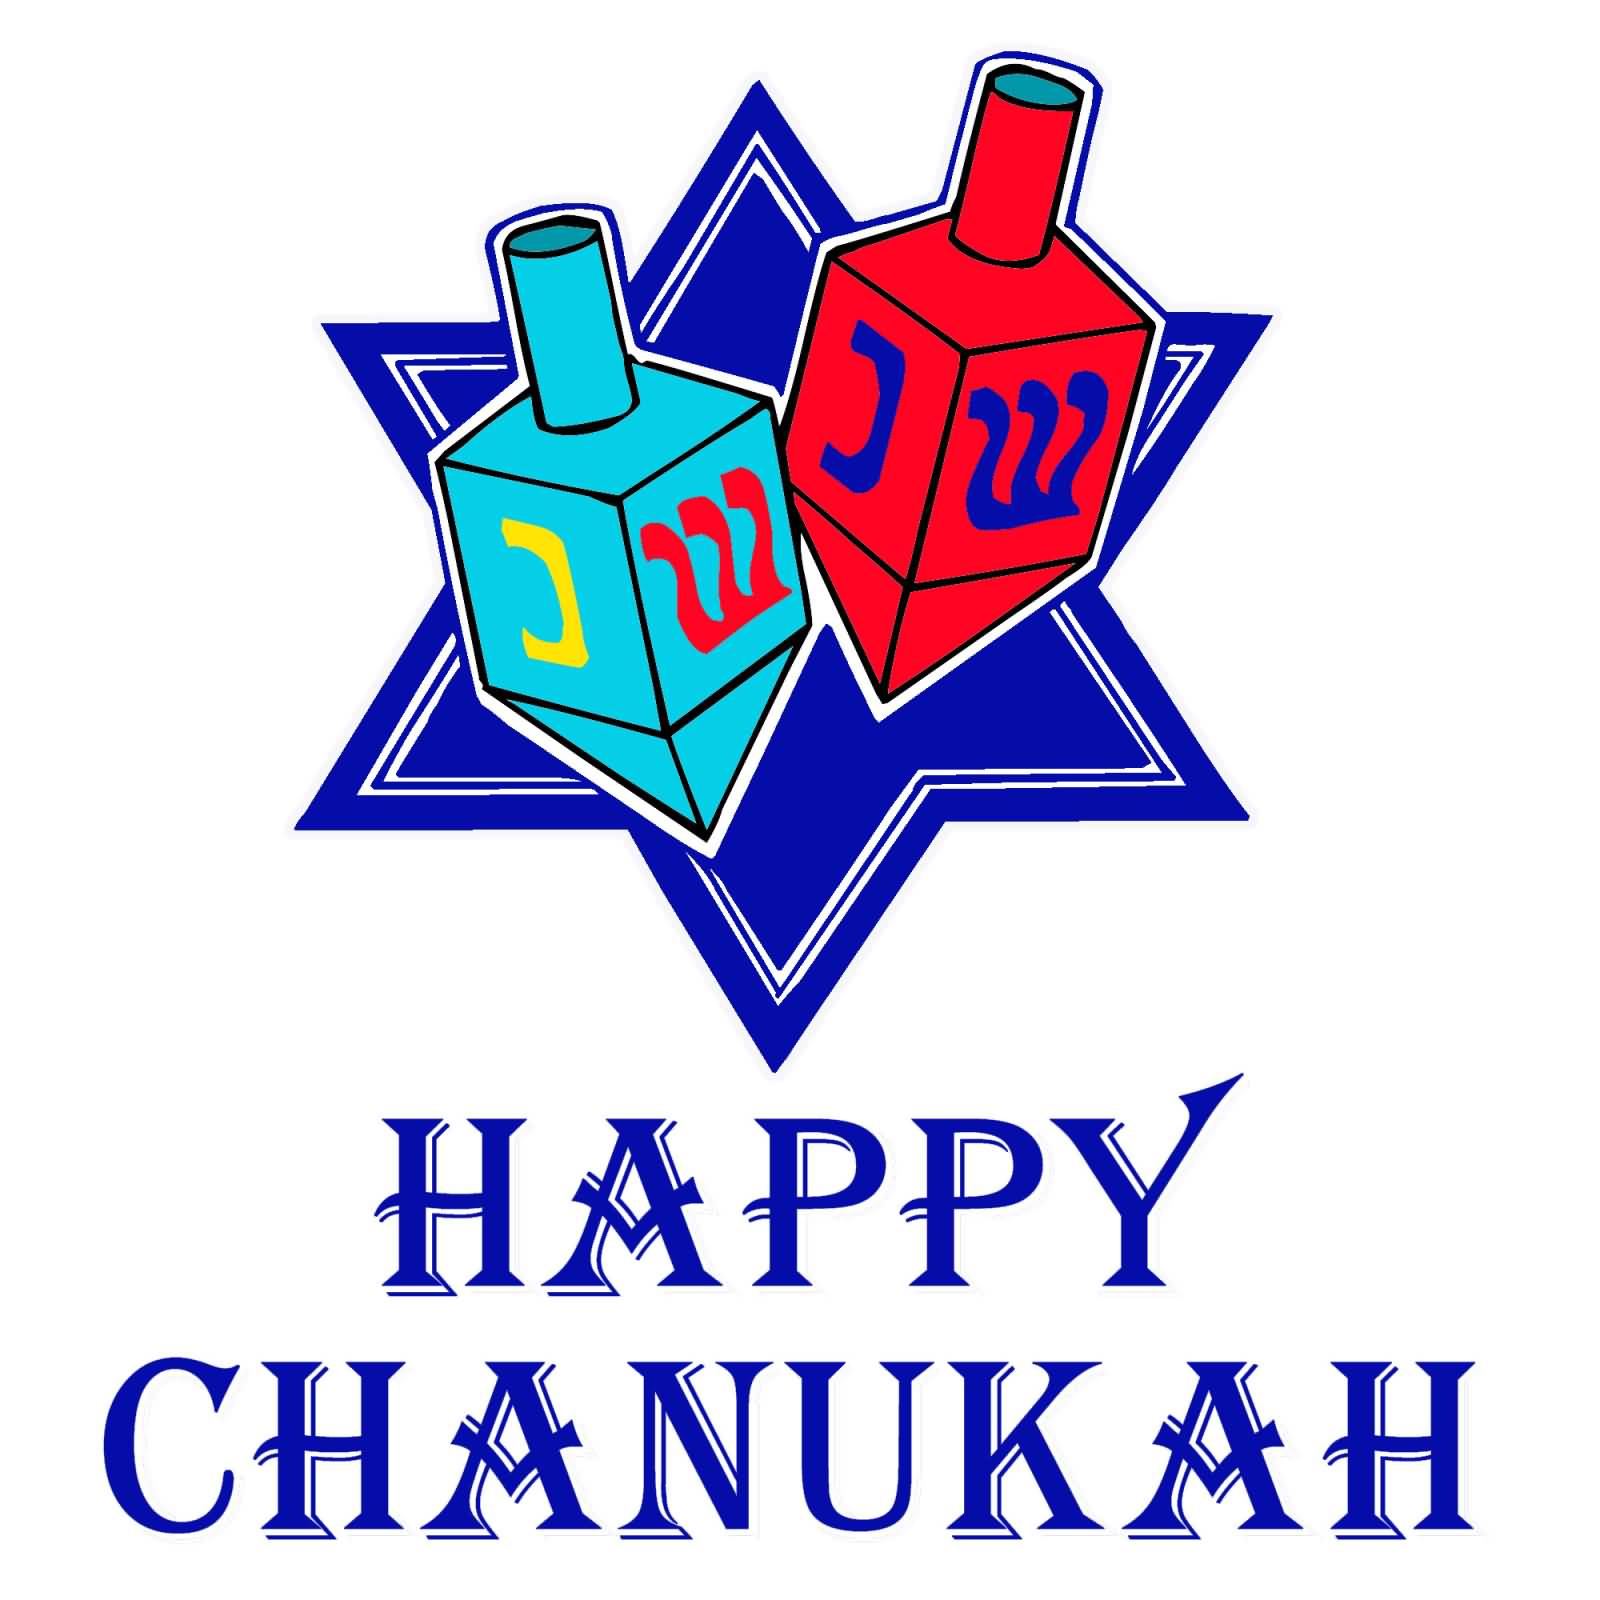 Happy Chanukah Wishes